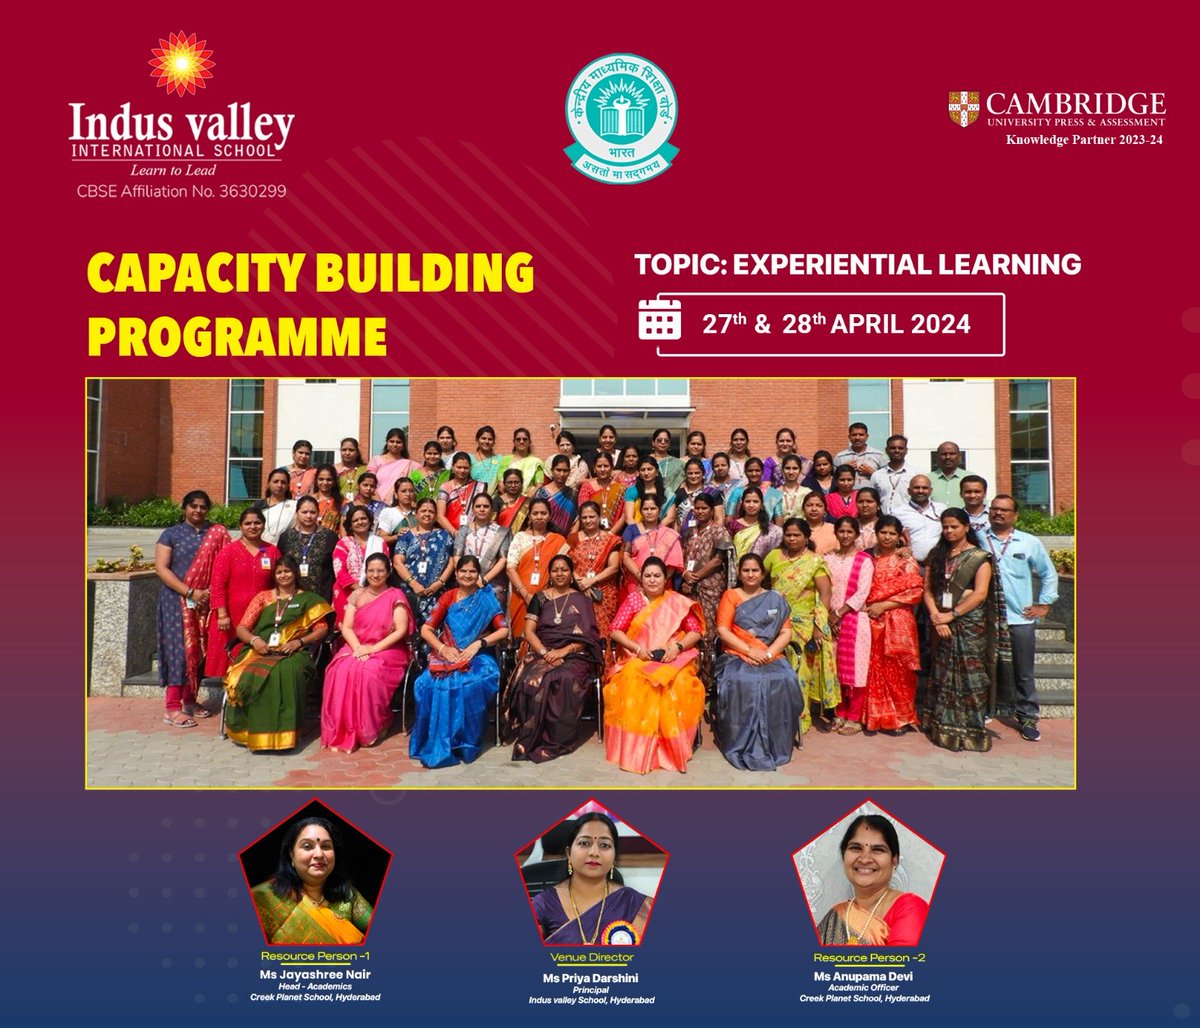 The CBSE Capacity Building Programme at IVIS, held on April 27 and 28, focused on the pivotal topic of experiential learning.

#IVIS #CBSE #CapacityBuildingProgramme #ExperientialLearning #StudentEngagement #HandsOnLearning #EducationalInnovation #CriticalThinking #ProblemSolving